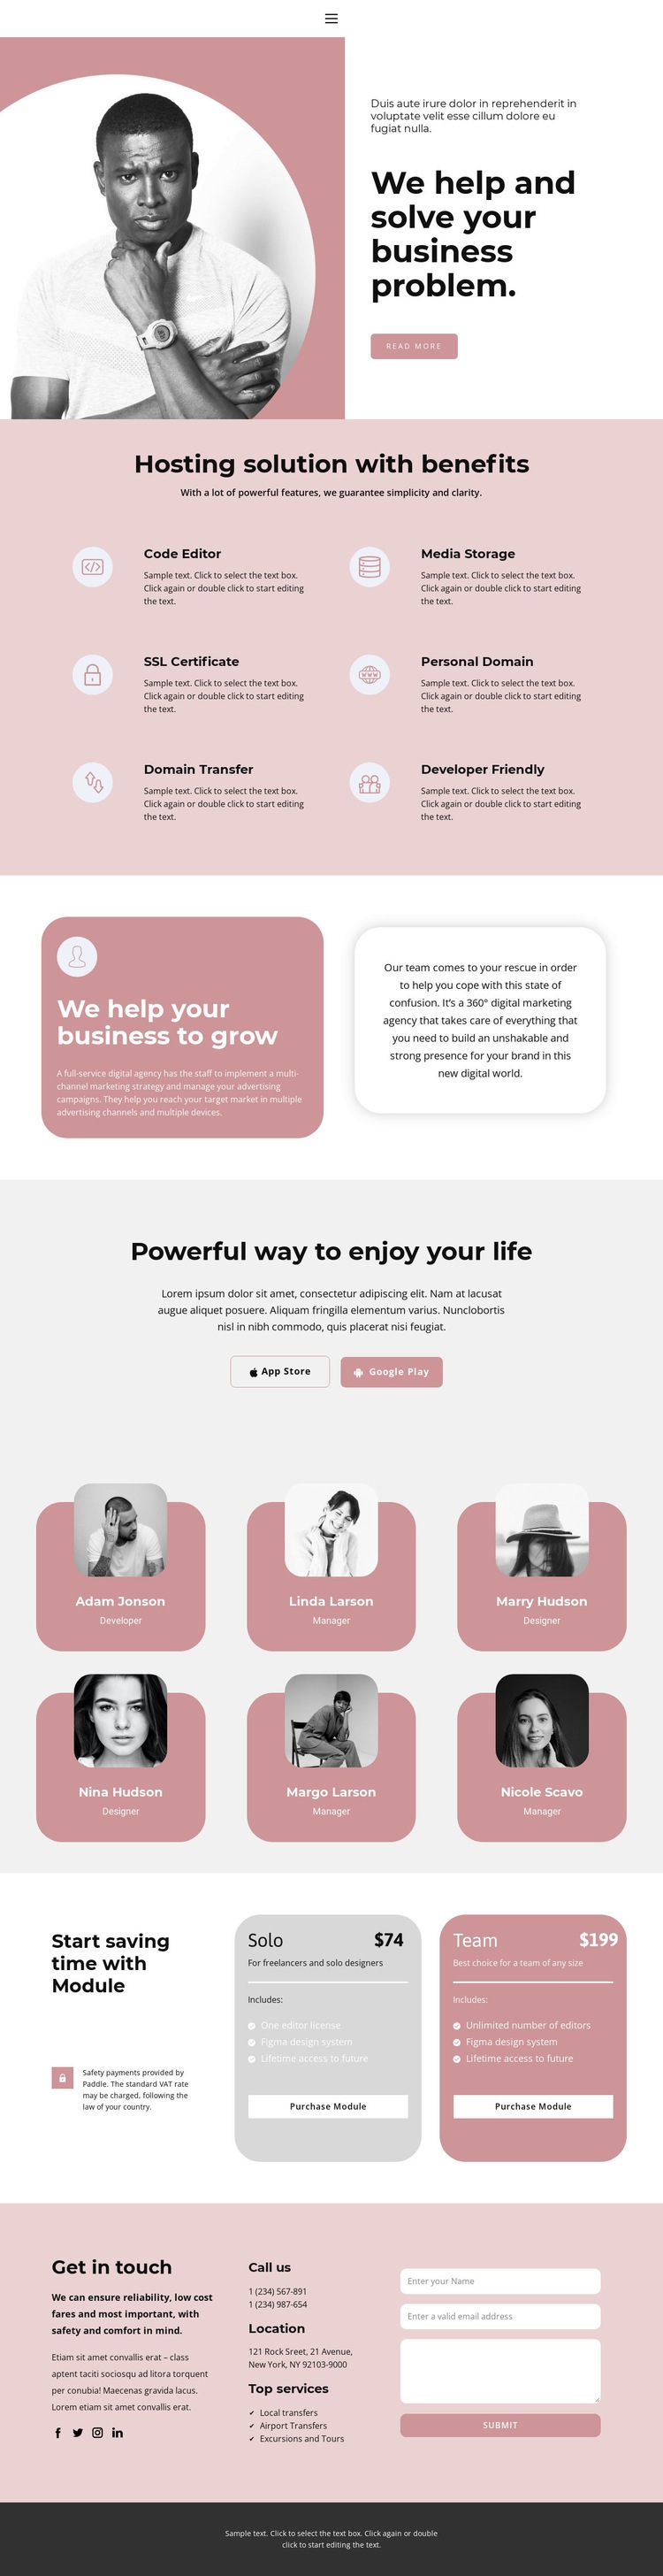 Problem solving is our choice Webflow Template Alternative